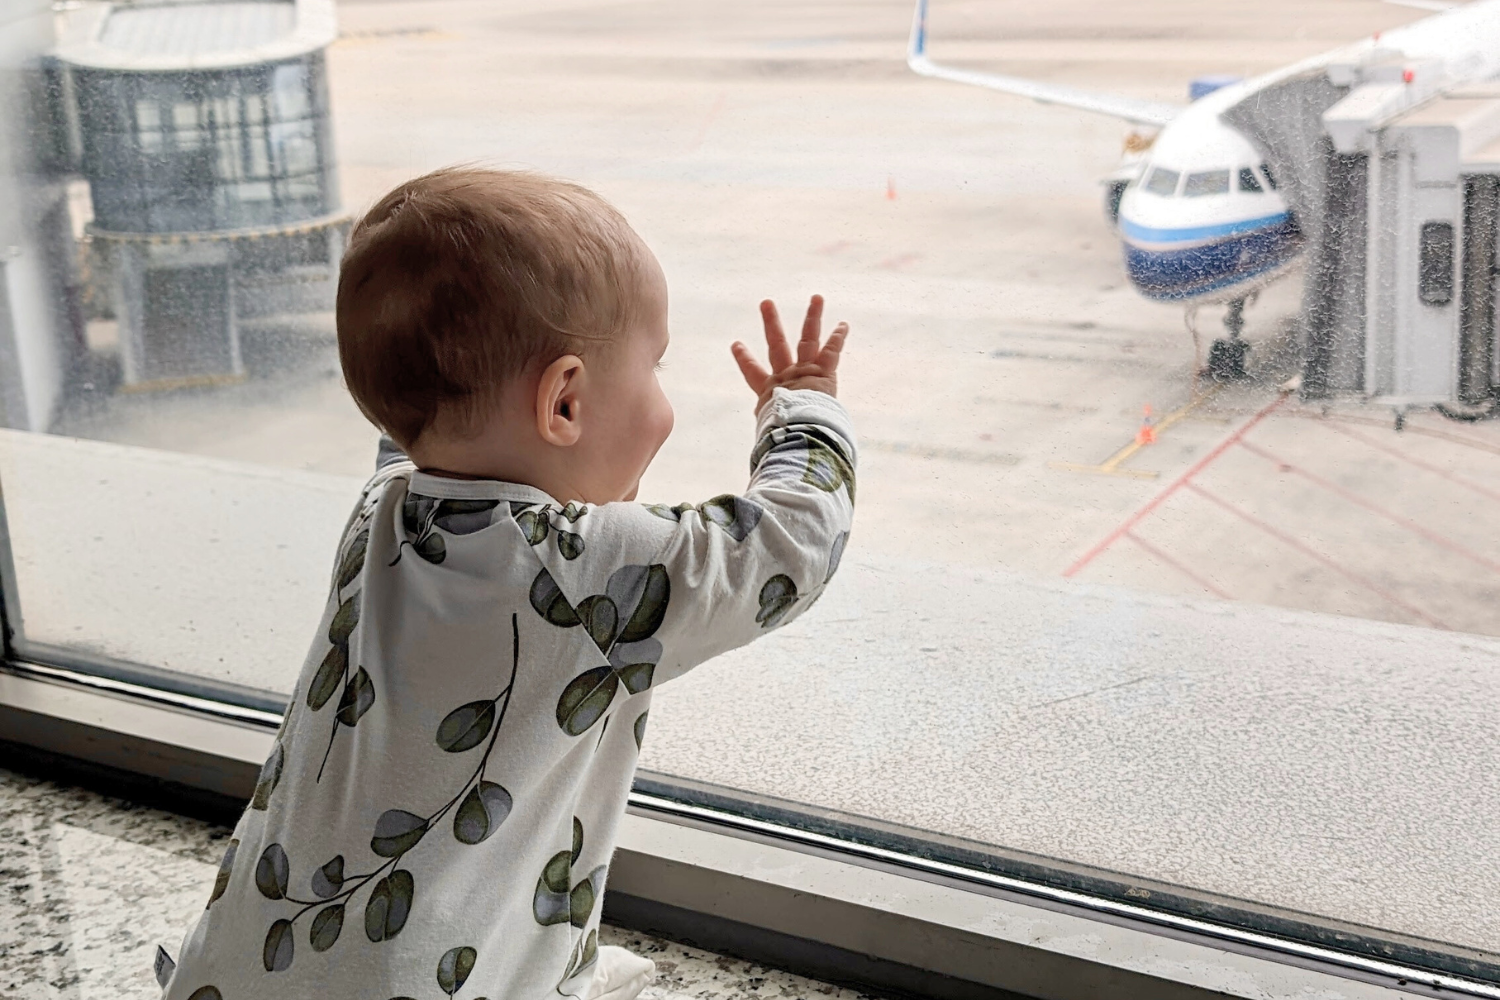 All You Need to Know About Long-Haul Travelling with Your Little One